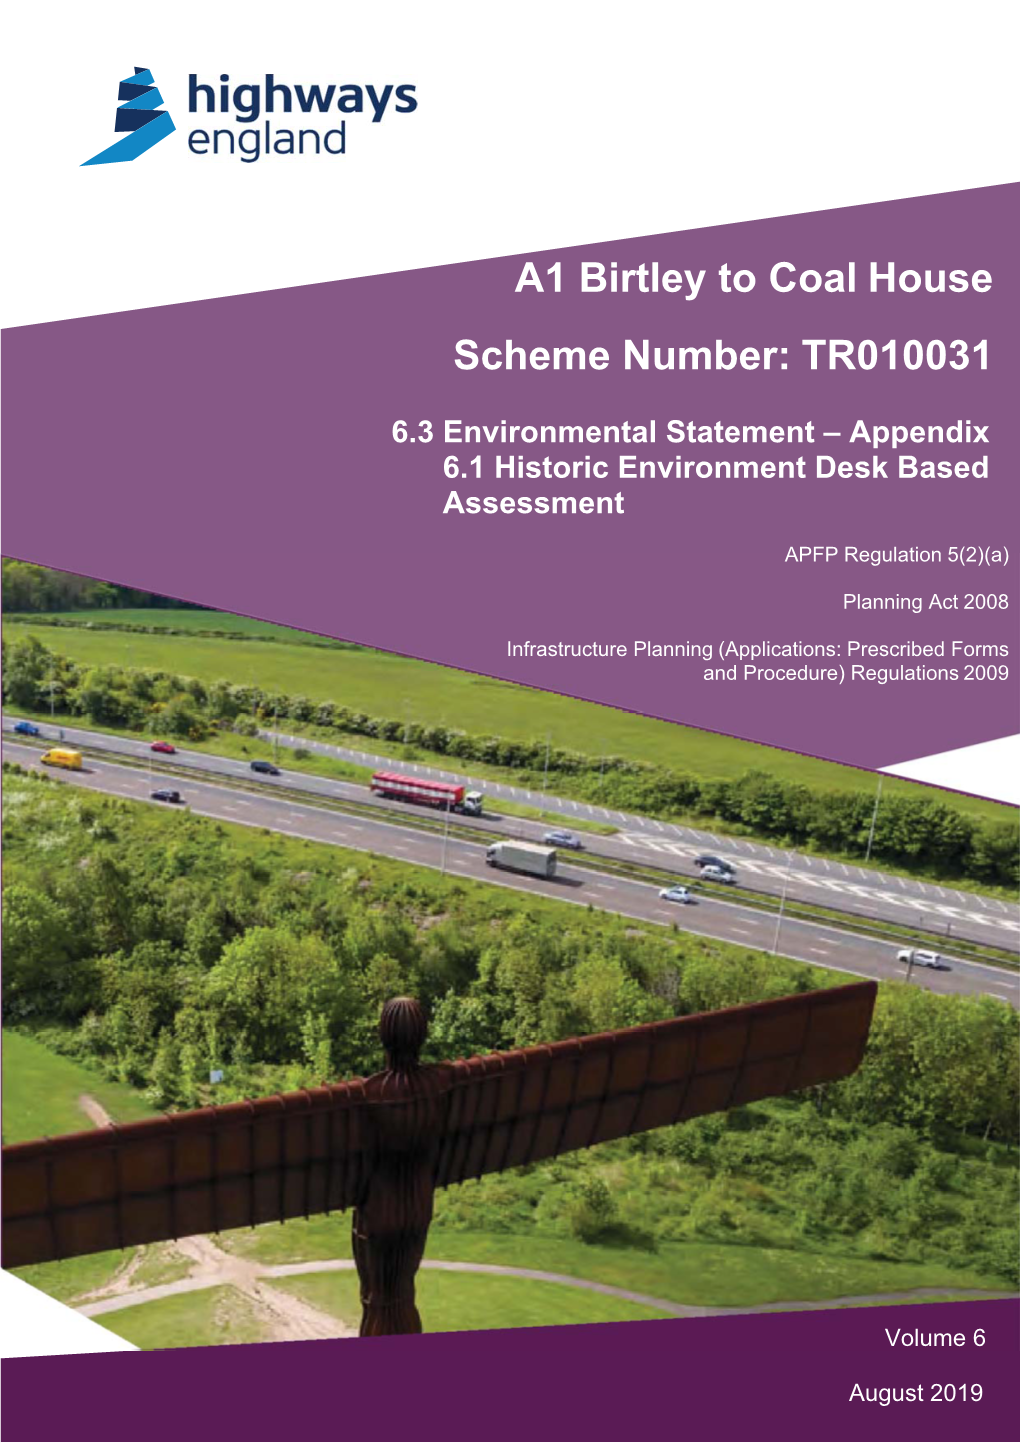 A1 Birtley to Coal House Scheme Number: TR010031